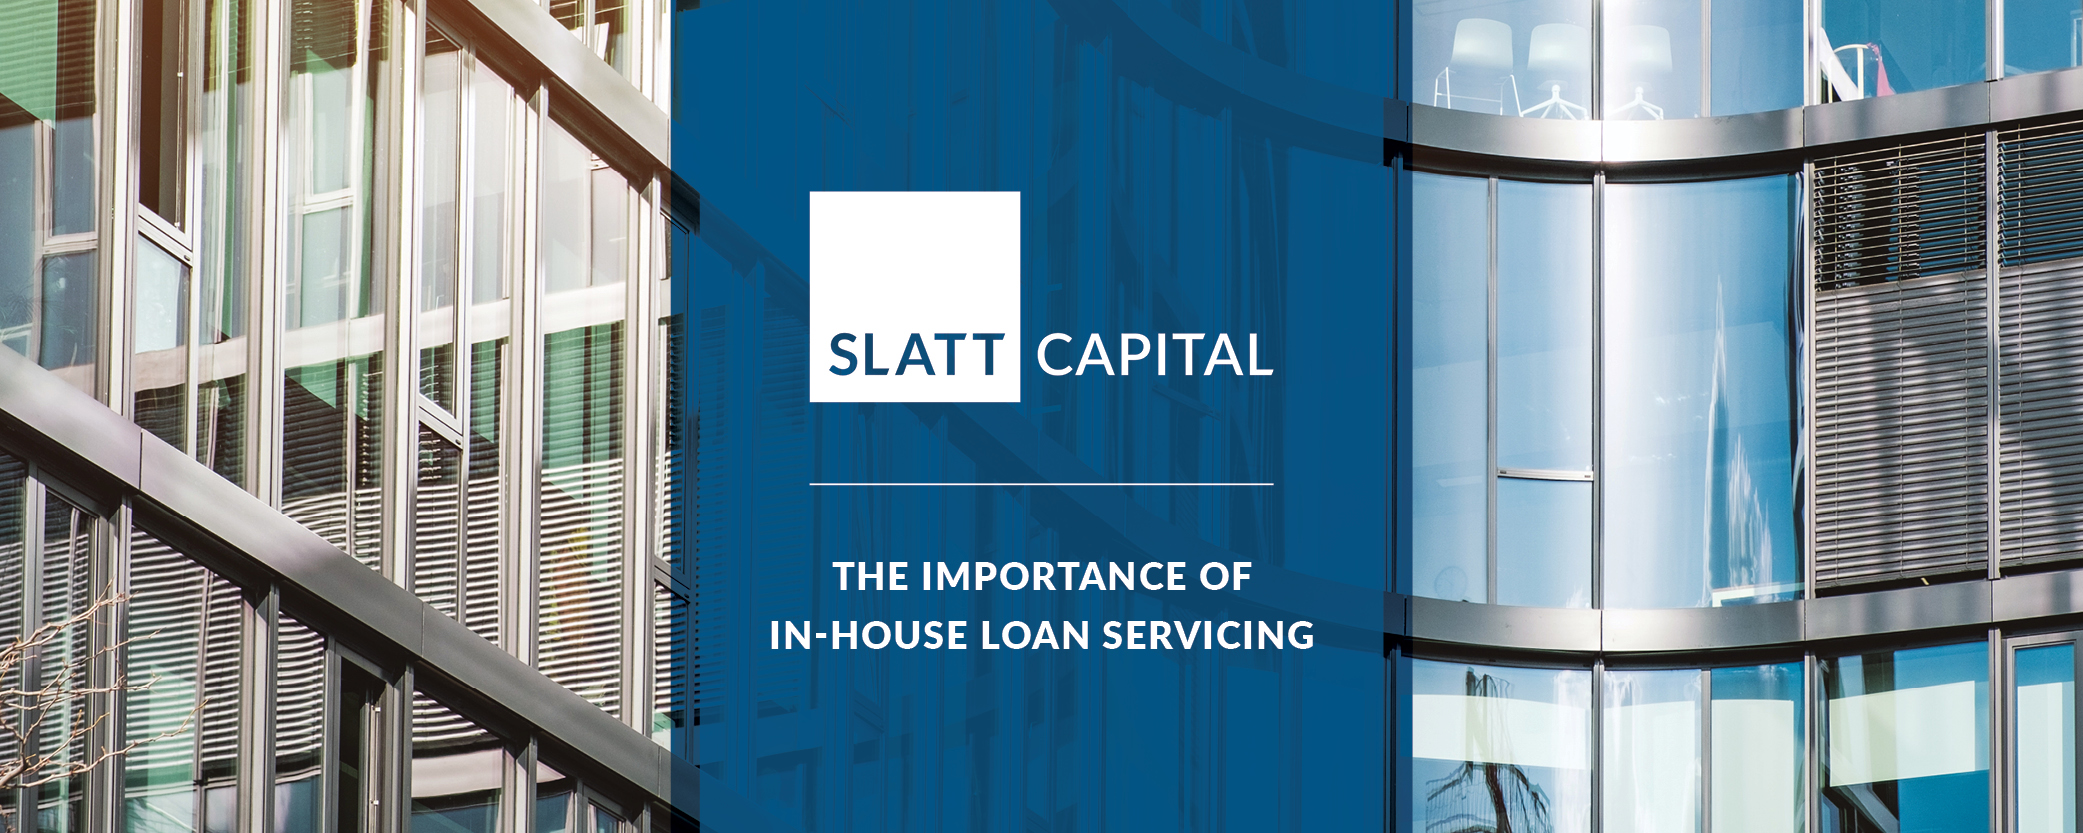 The importance of in-house loan servicing